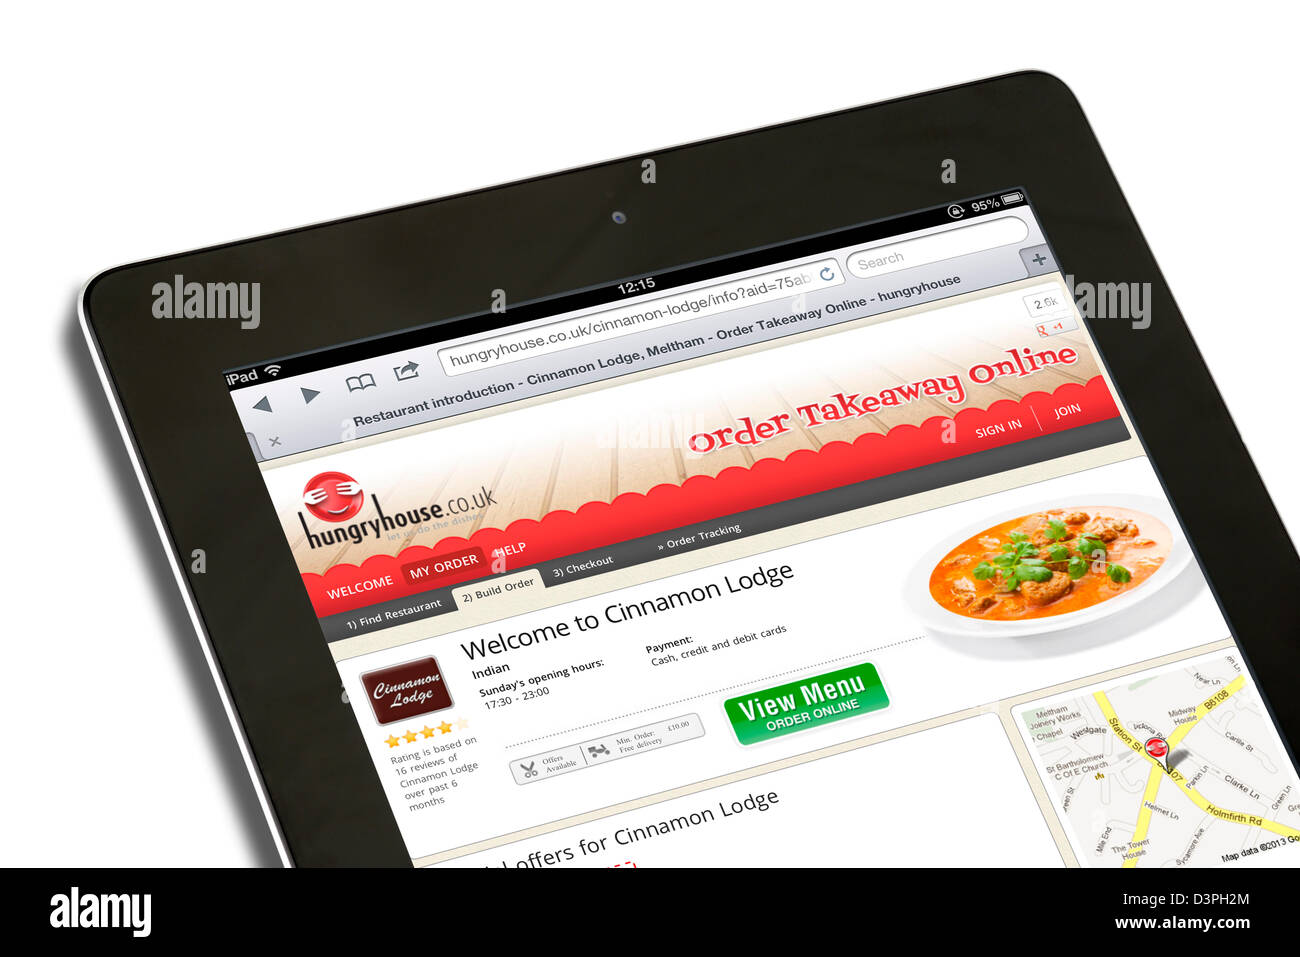 The hungryhouse.co.uk takeaway ordering website viewed on an iPad Stock Photo